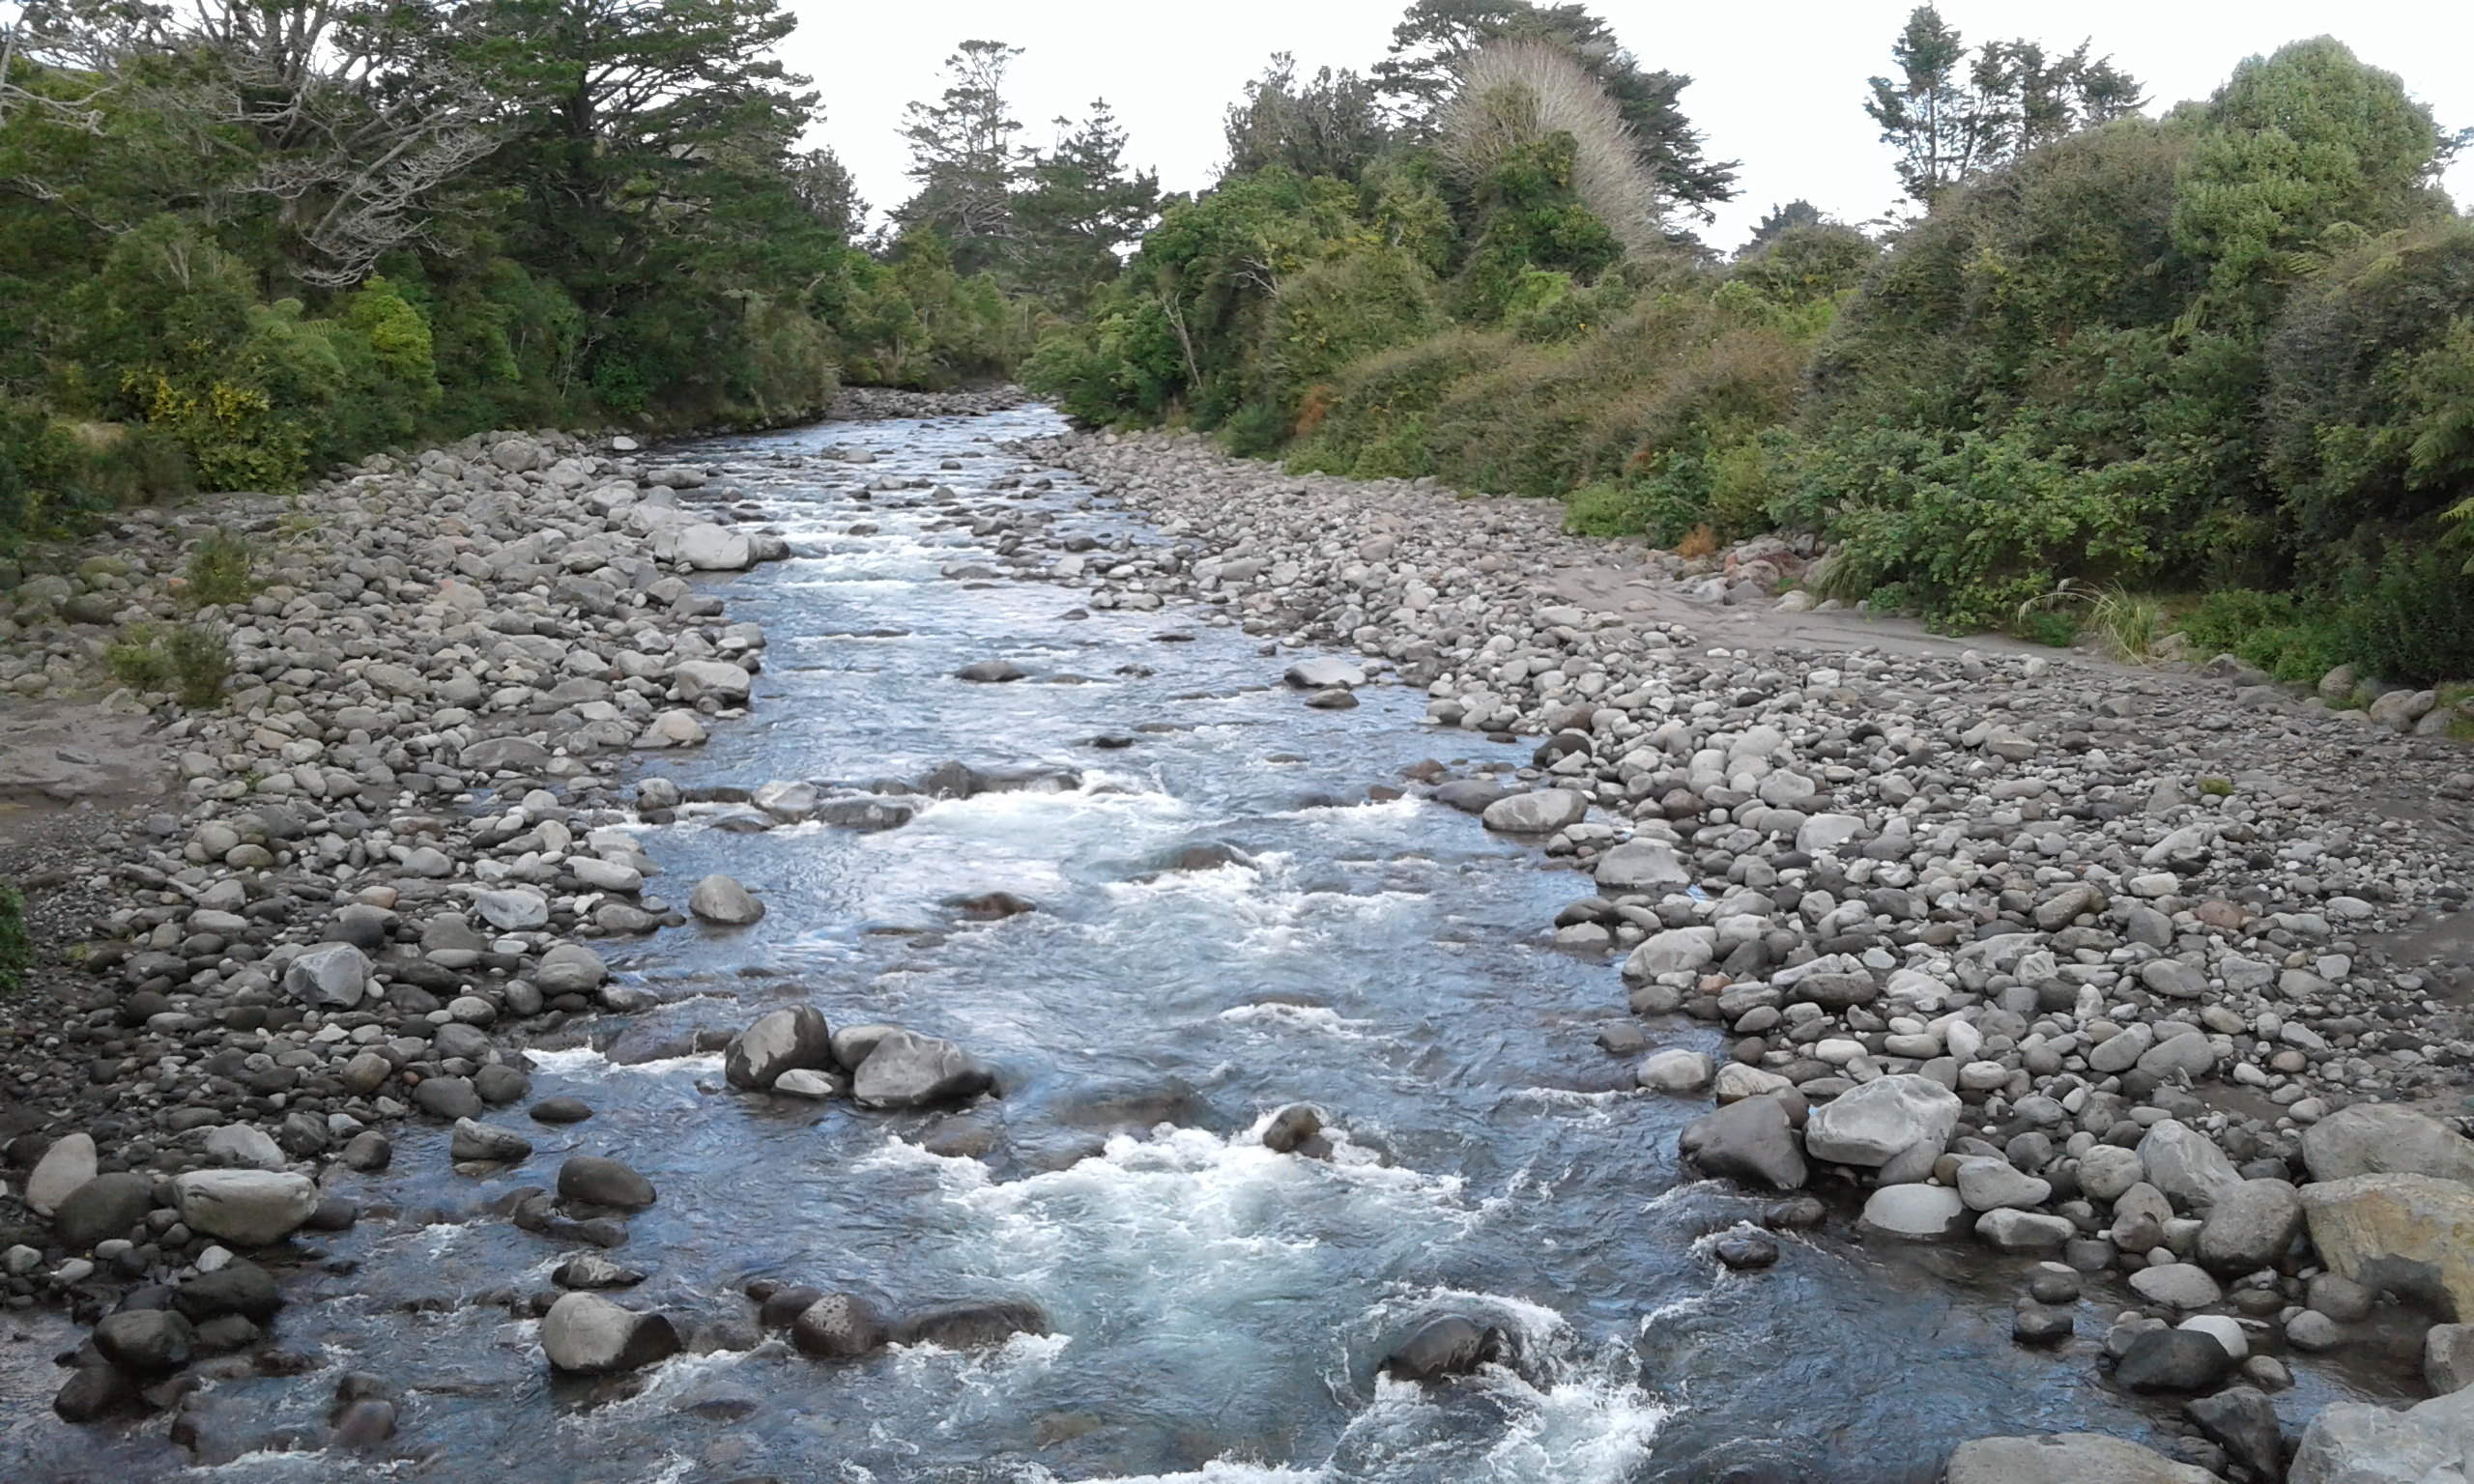 TRL2Nov21. The Hangatahua Stony River is clearing nicely following the July 2021 headwater erosion event.